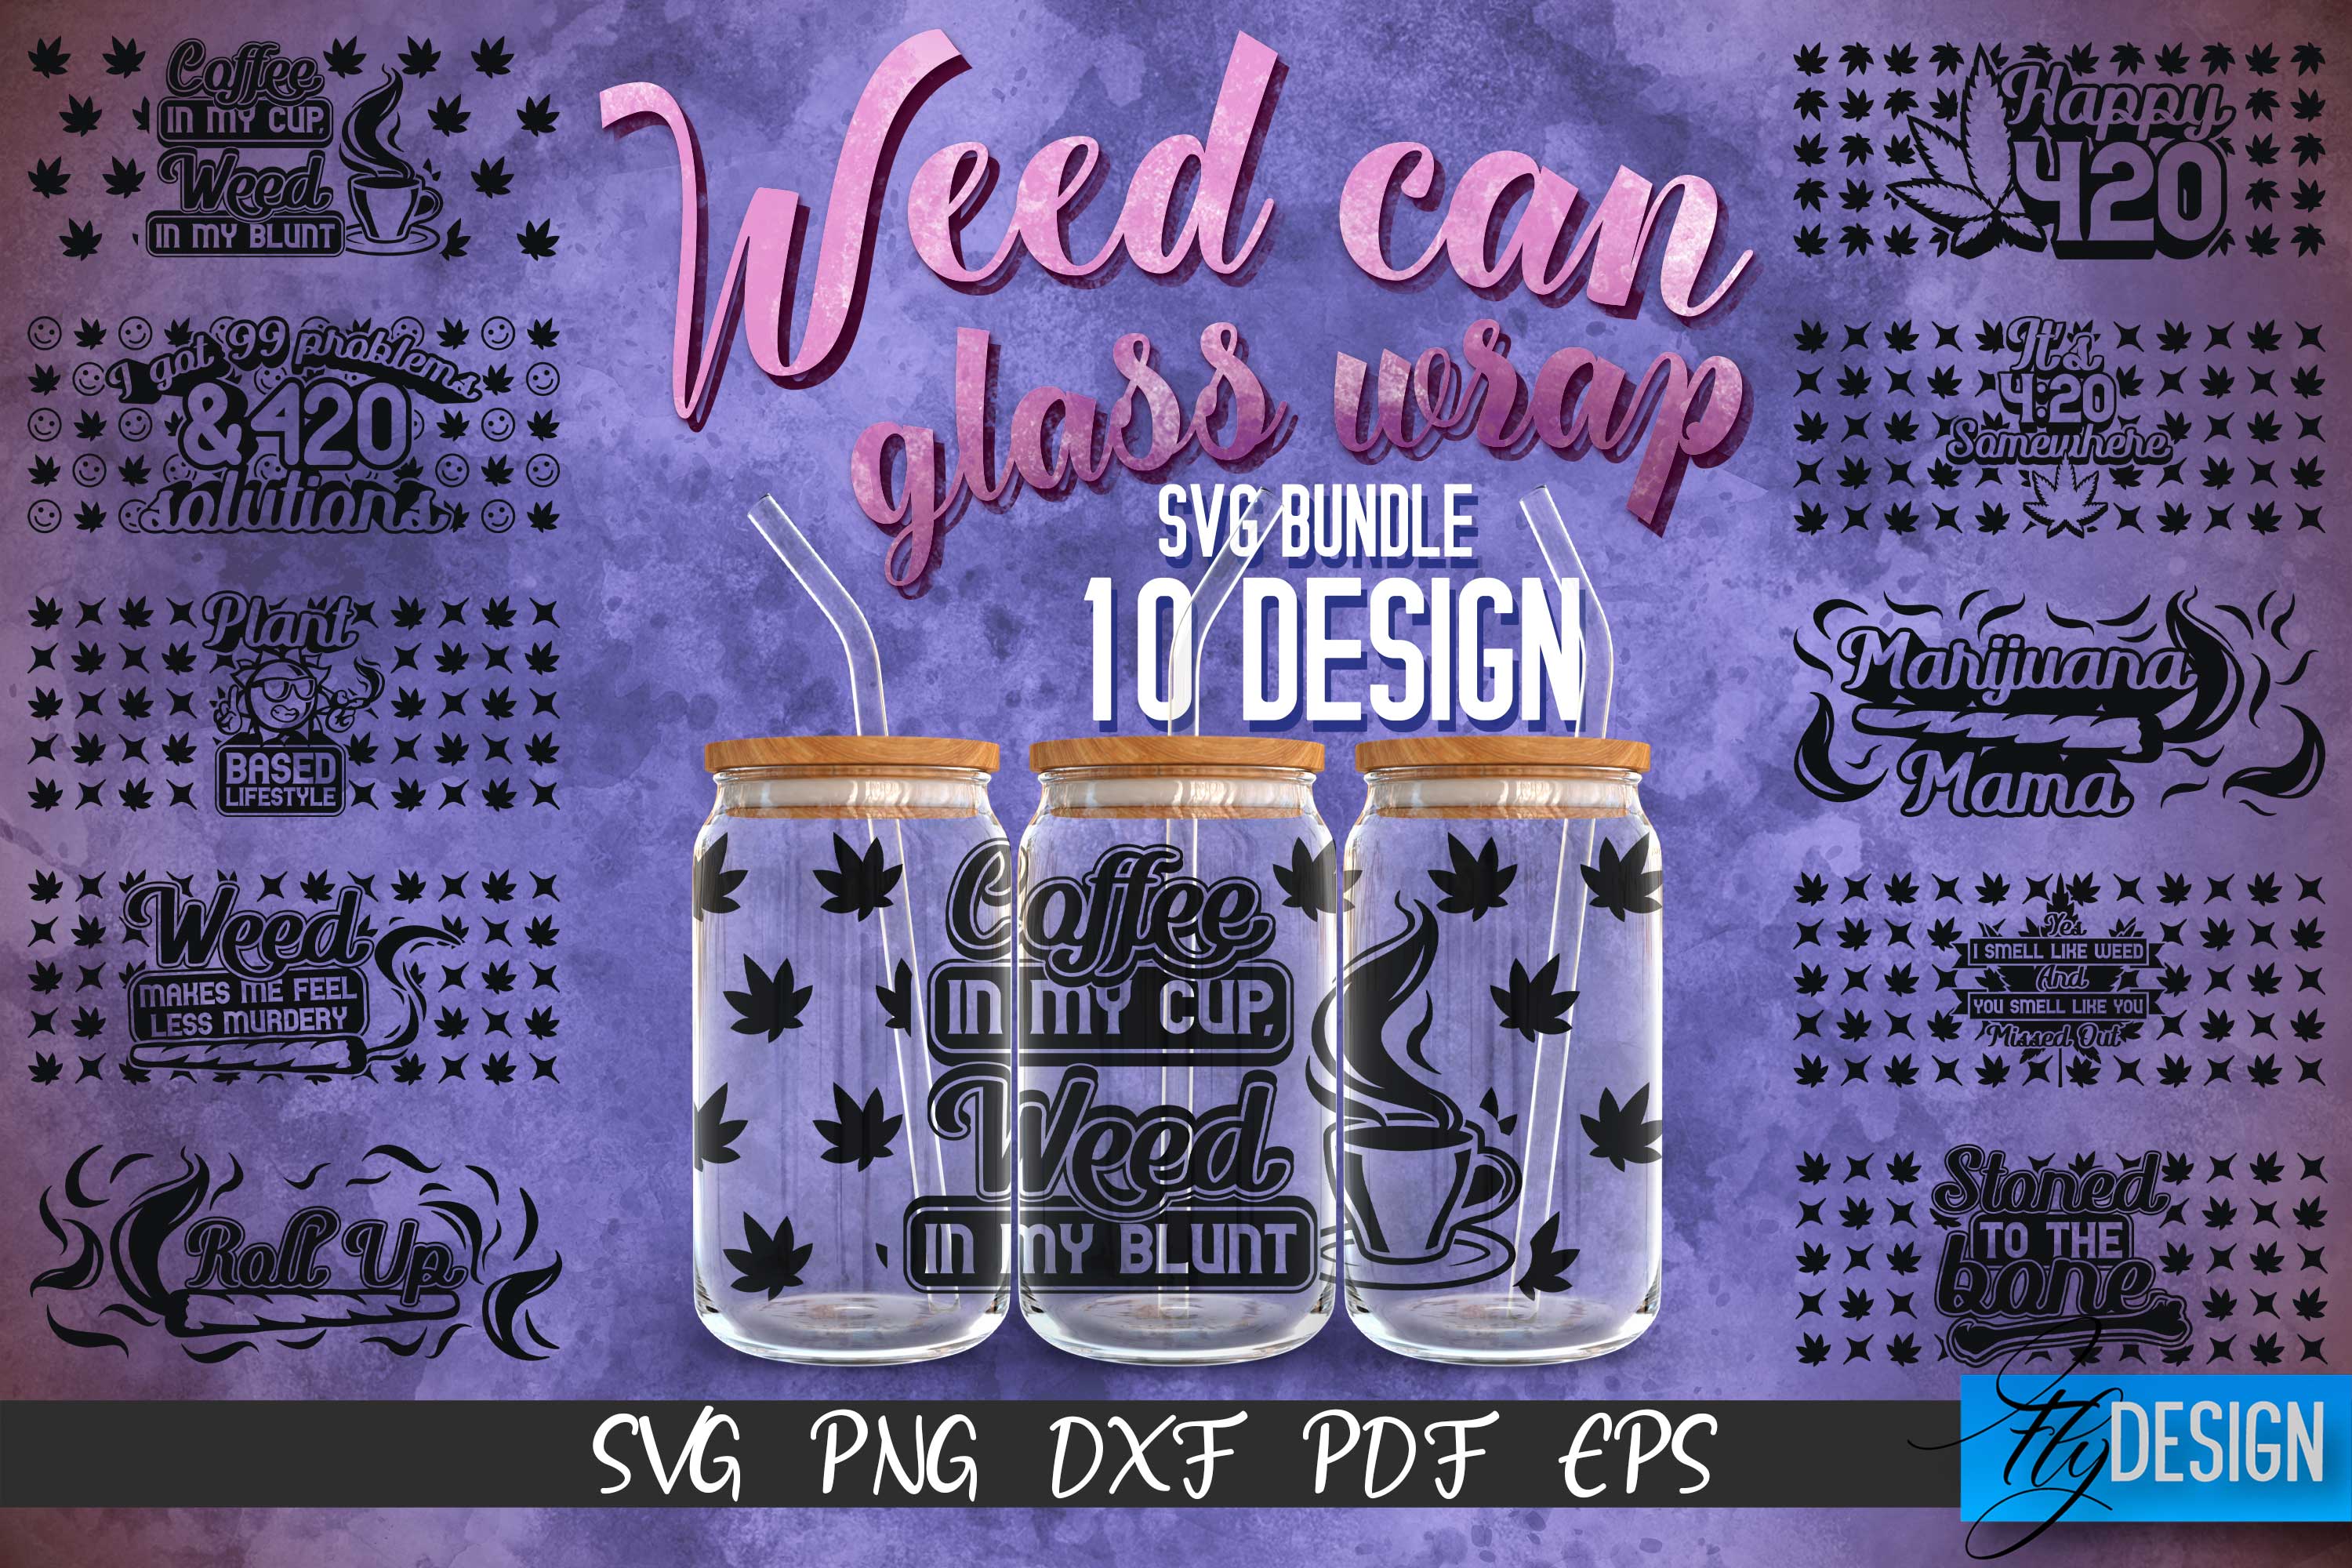 Beer Can Glass Wrap Bundle 20 SVG Designs for Libbey Glass - So Fontsy